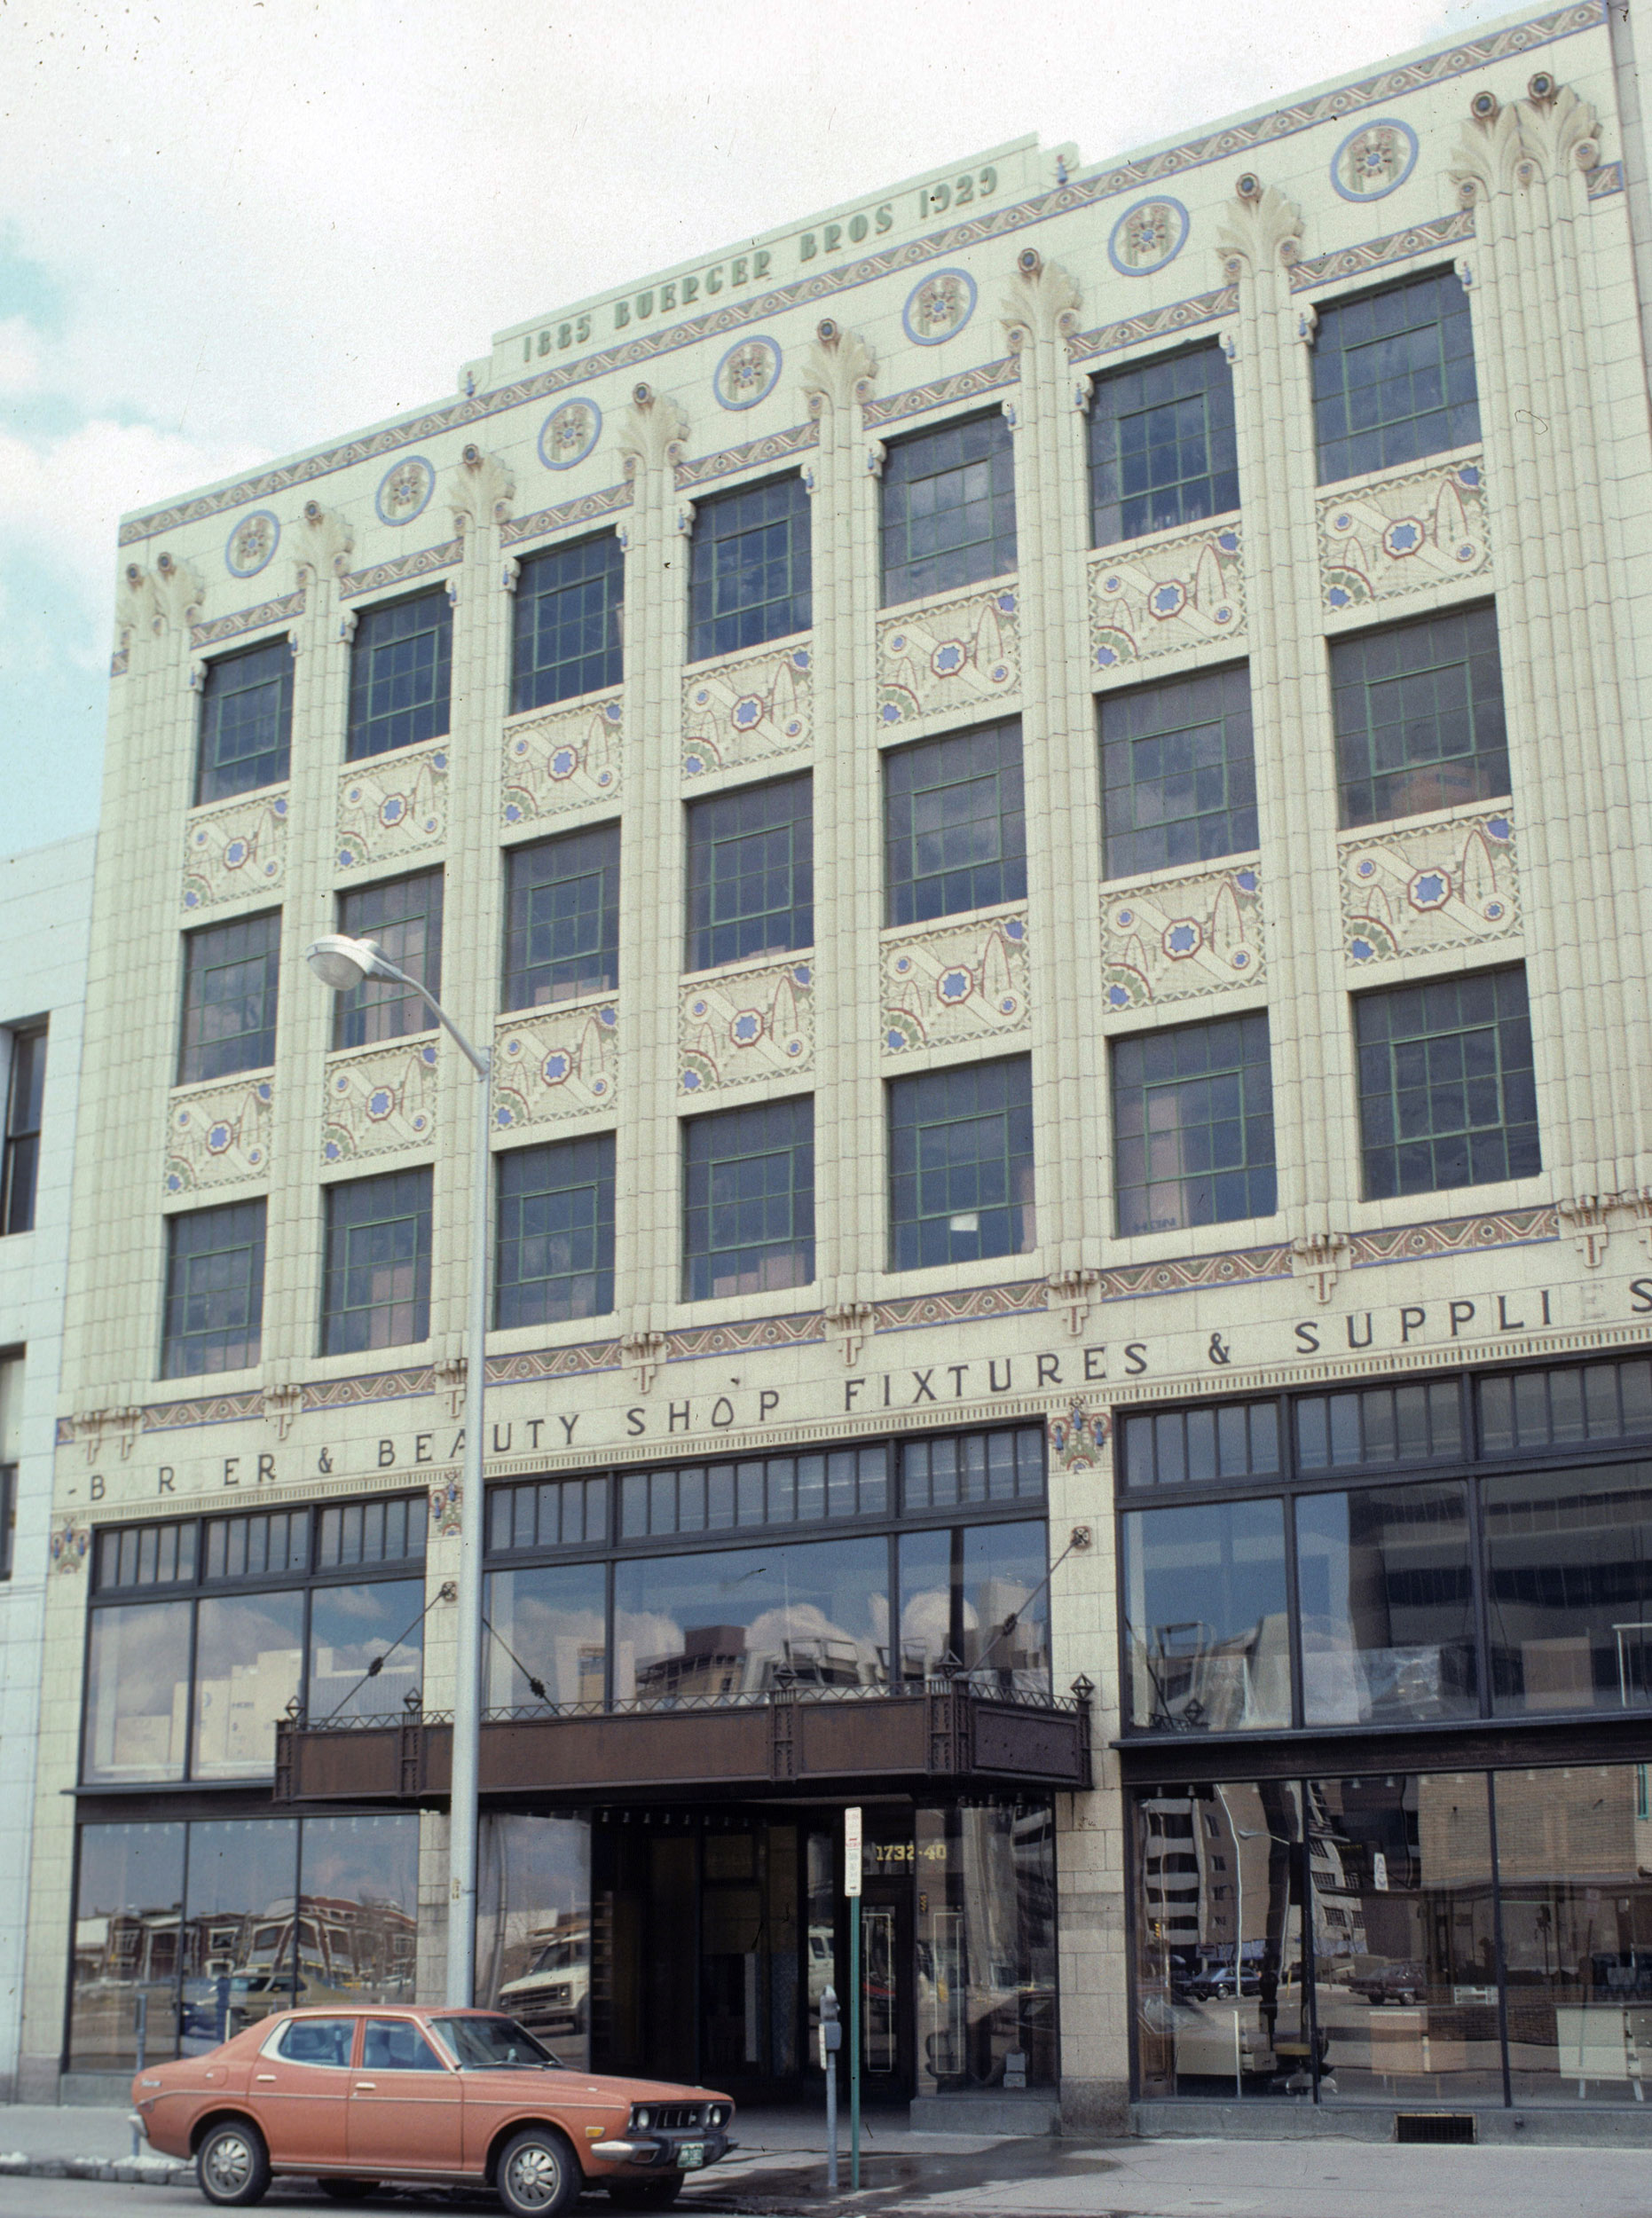 The Buerger Brothers building in Denver, an example of the Art Deco style.